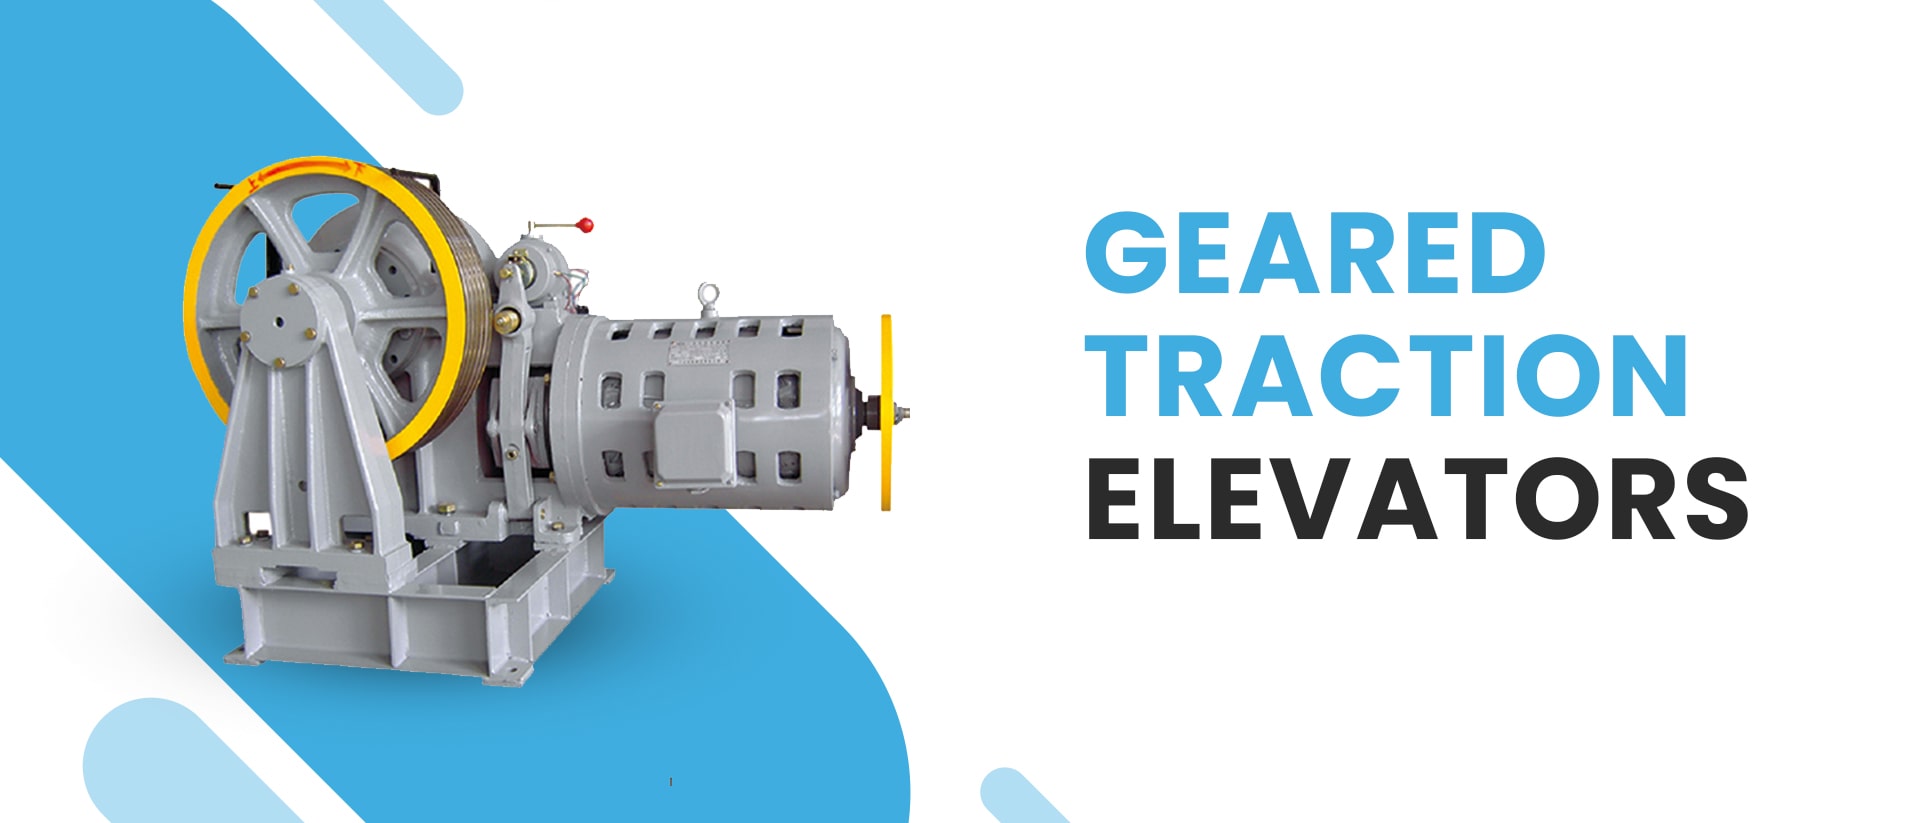 Geared Traction Elevators-Everything You Need To Know About Automobile Elevators